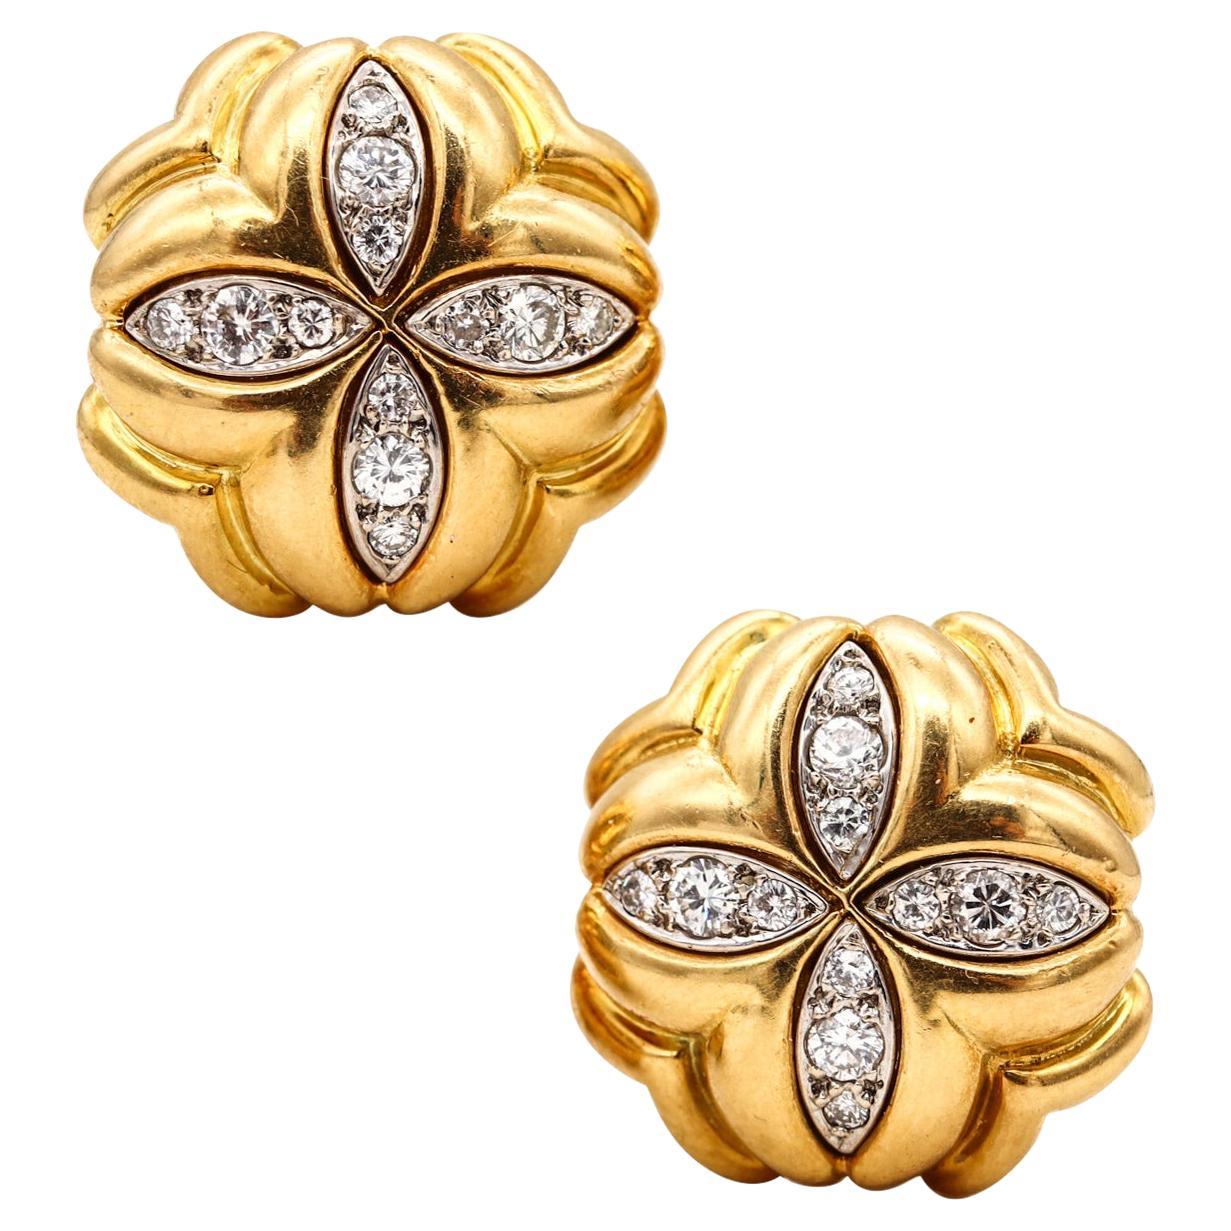 Cartier 1970 Pair Of Clovers Clips Earrings In 18Kt Yellow Gold With VS Diamonds For Sale